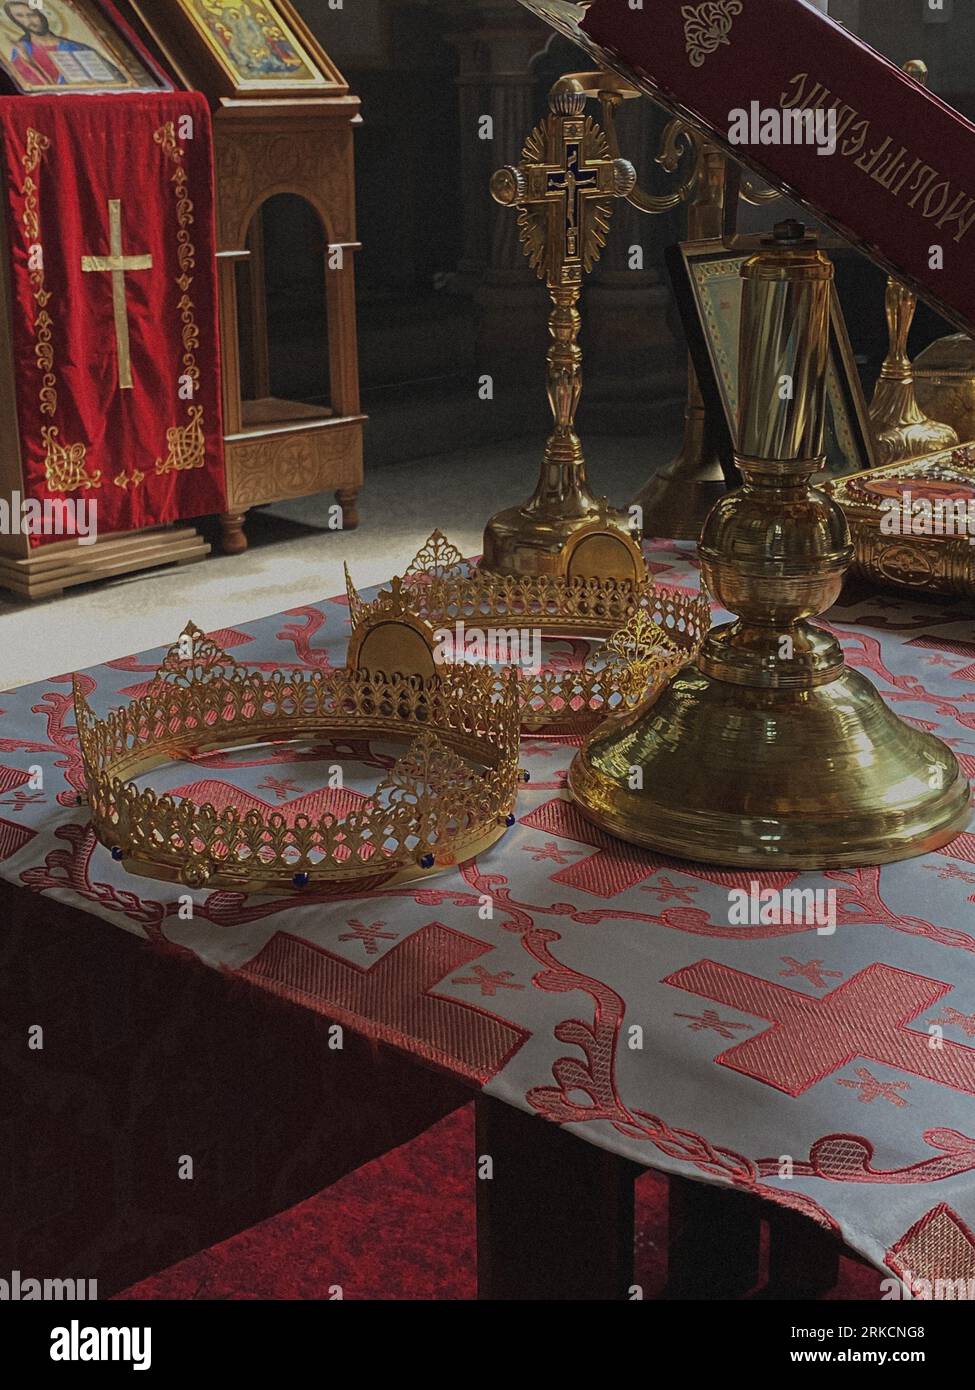 An ornate golden table laden with decorative objects stands prominently in front of an altar in a ritualistic setting Stock Photo